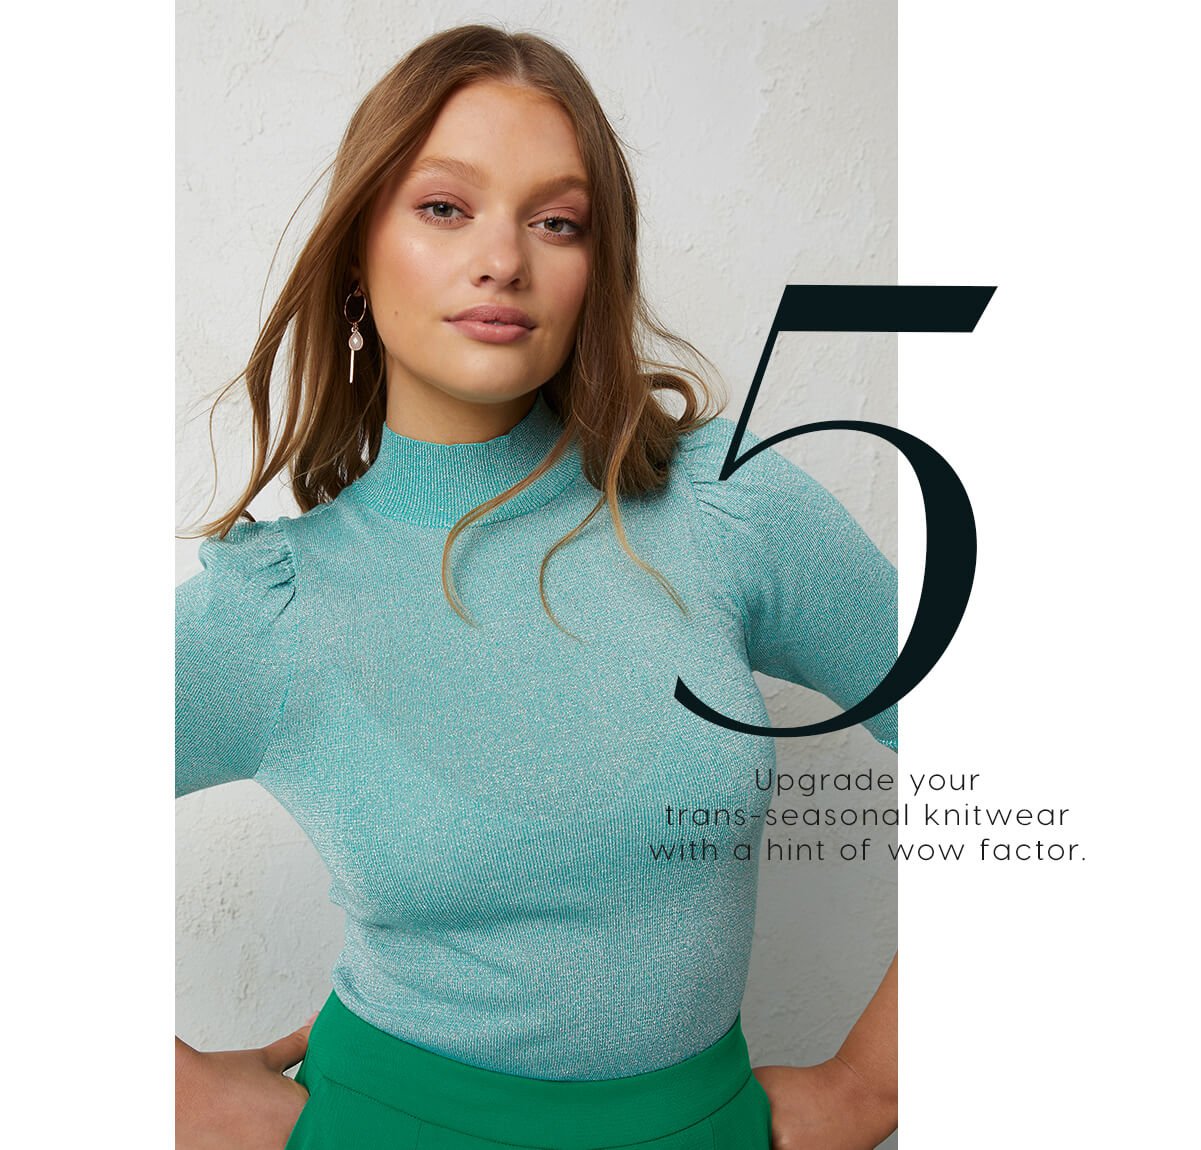 5. Upgrade your trans-seasonal knitwear with a hint of wow factor.